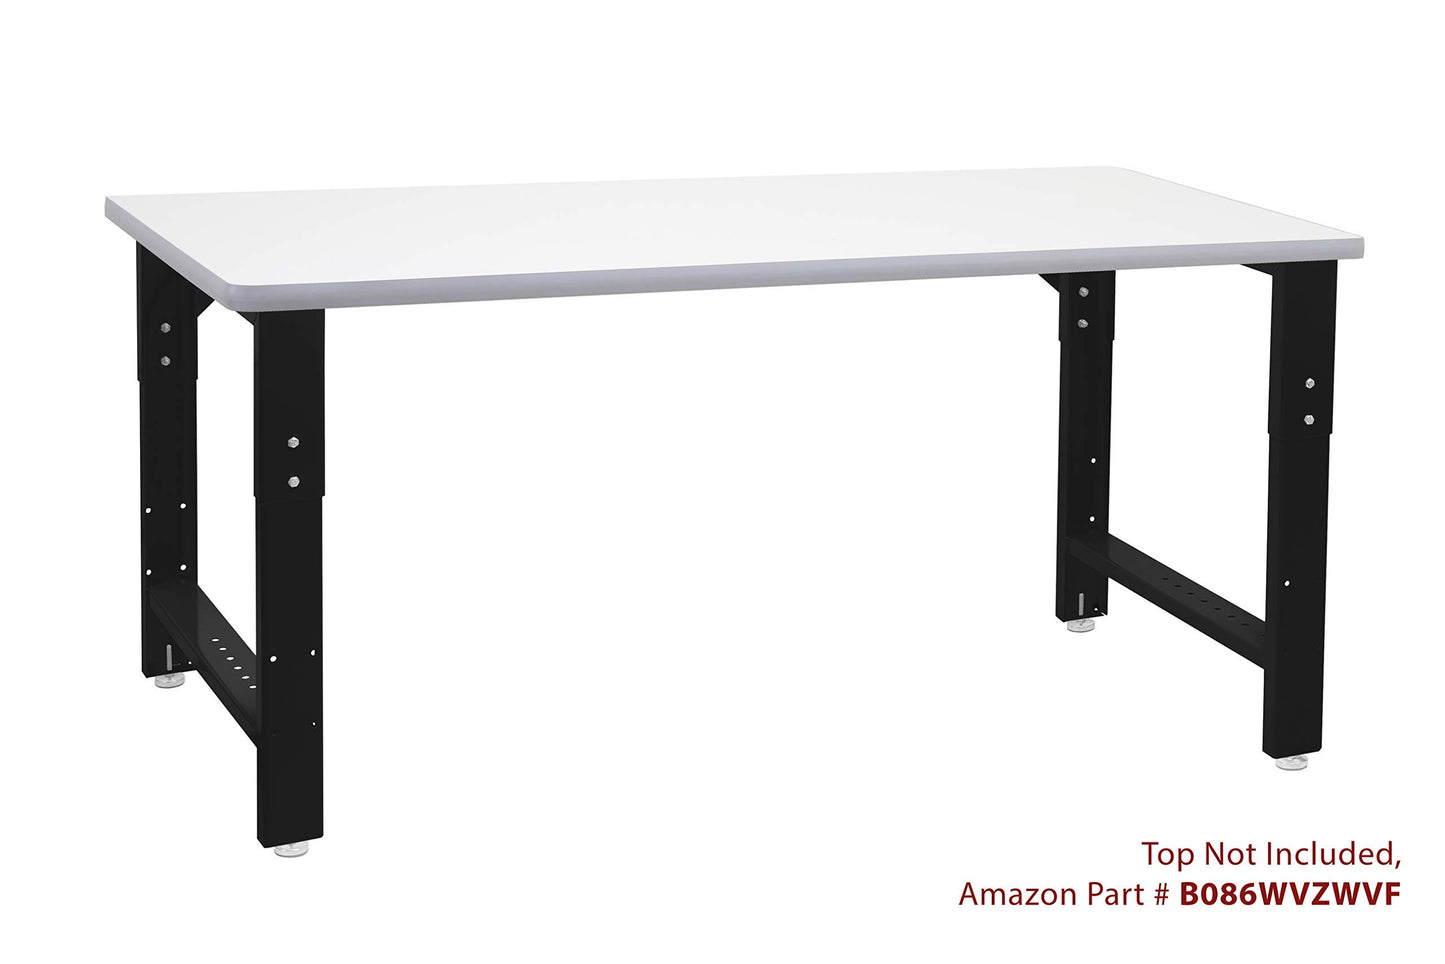 BenchPro Garage Workbench Table Frame 26" Depth - Black - 29" to 35" Height Adjustable - by BenchPro